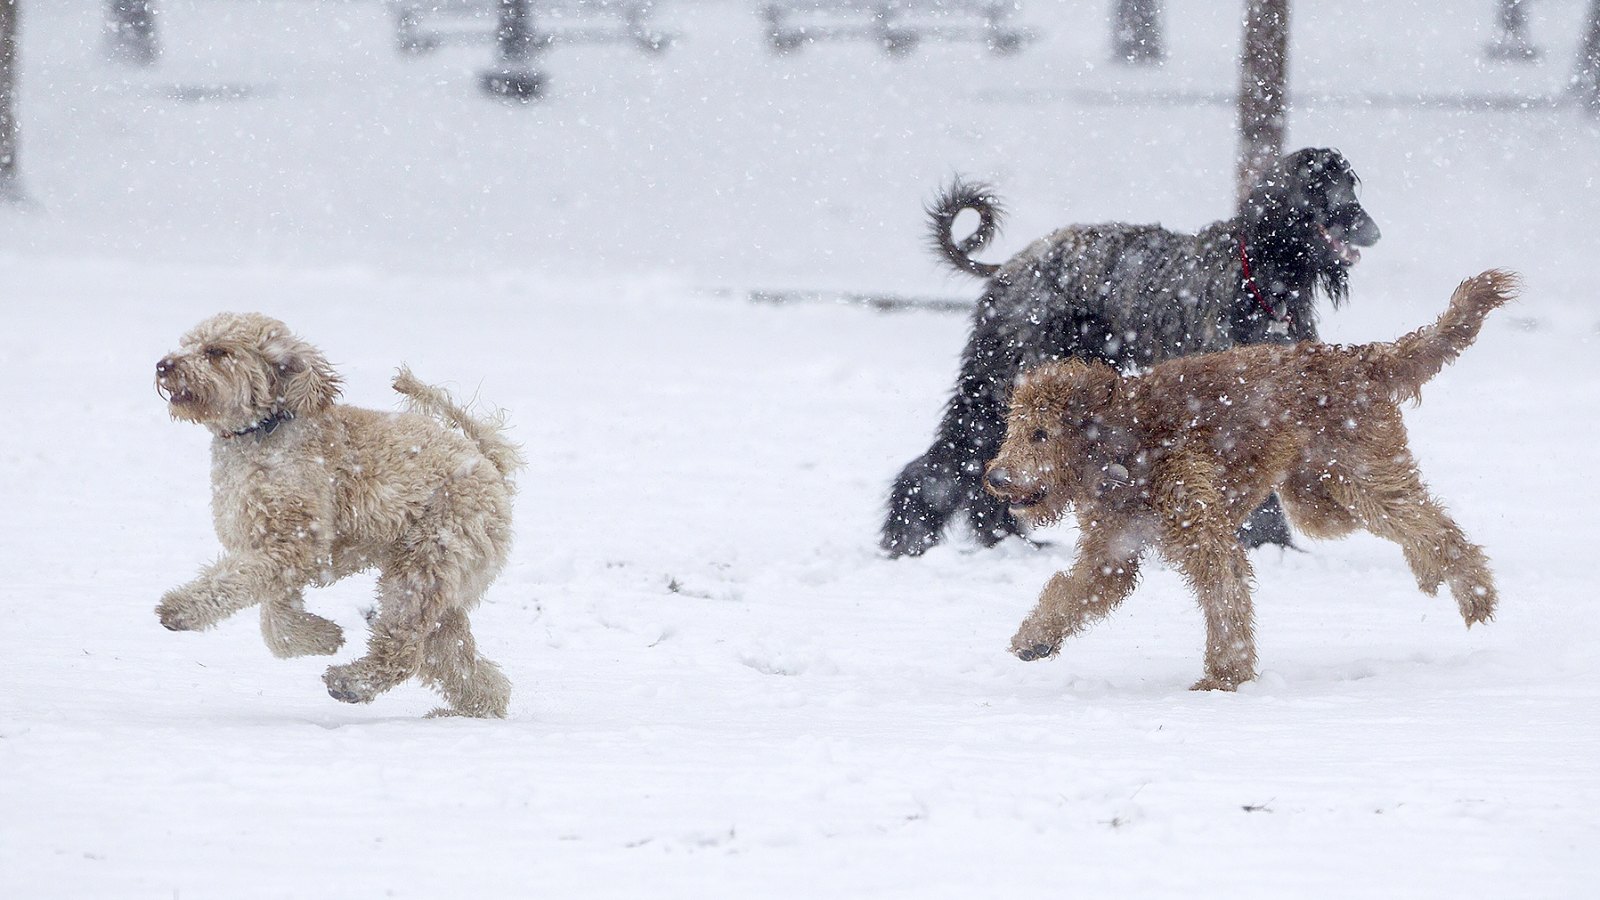 Dogs play in the snow on the Boston Common as Winter Storm Stella bears down on March 14, 2017 in Boston, Massachussets.